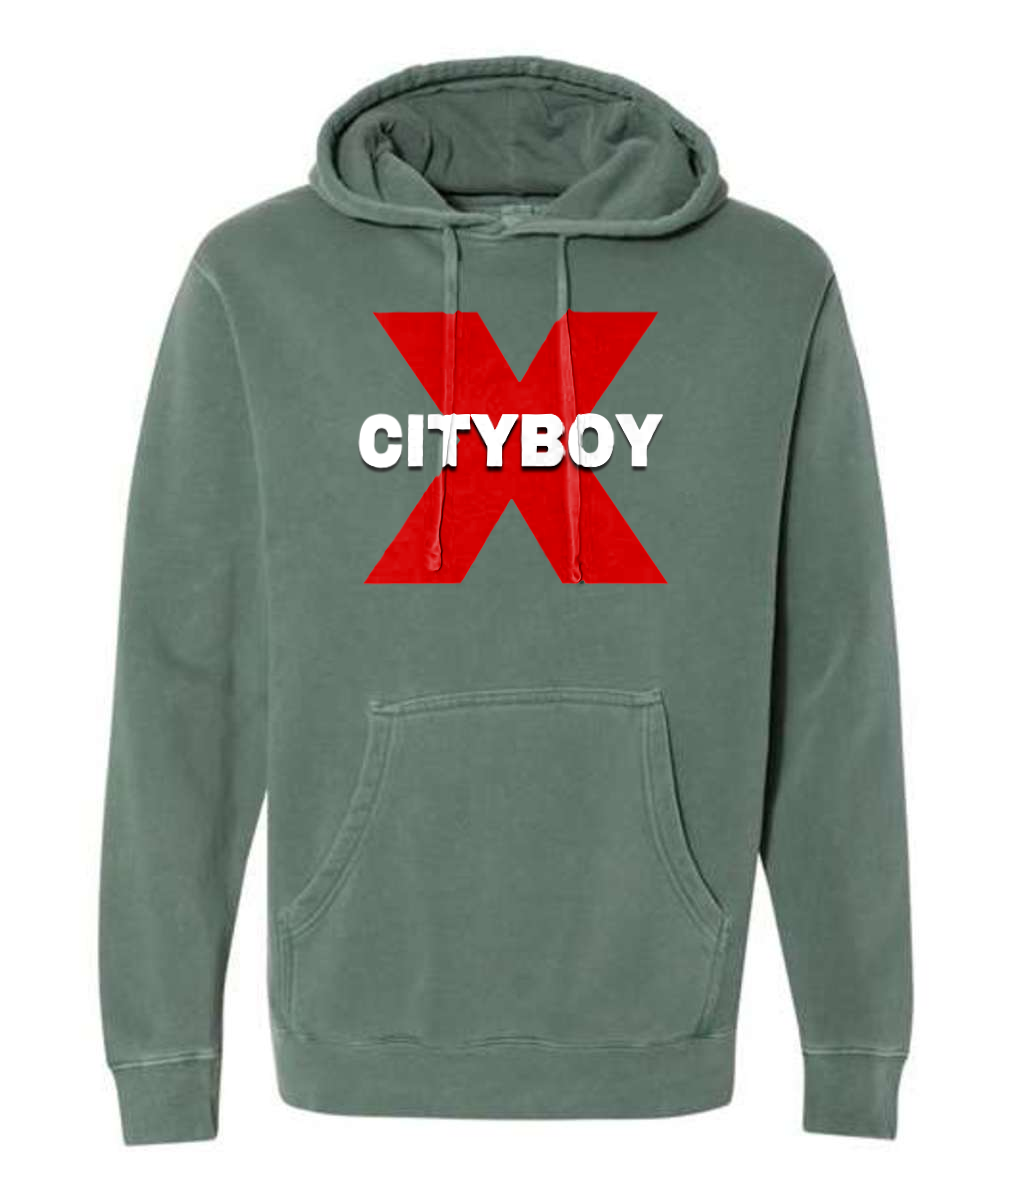 CITYBOY print Independent Trading Co. - Unisex Midweight Pigment-Dyed Hooded Sweatshirt or Similar